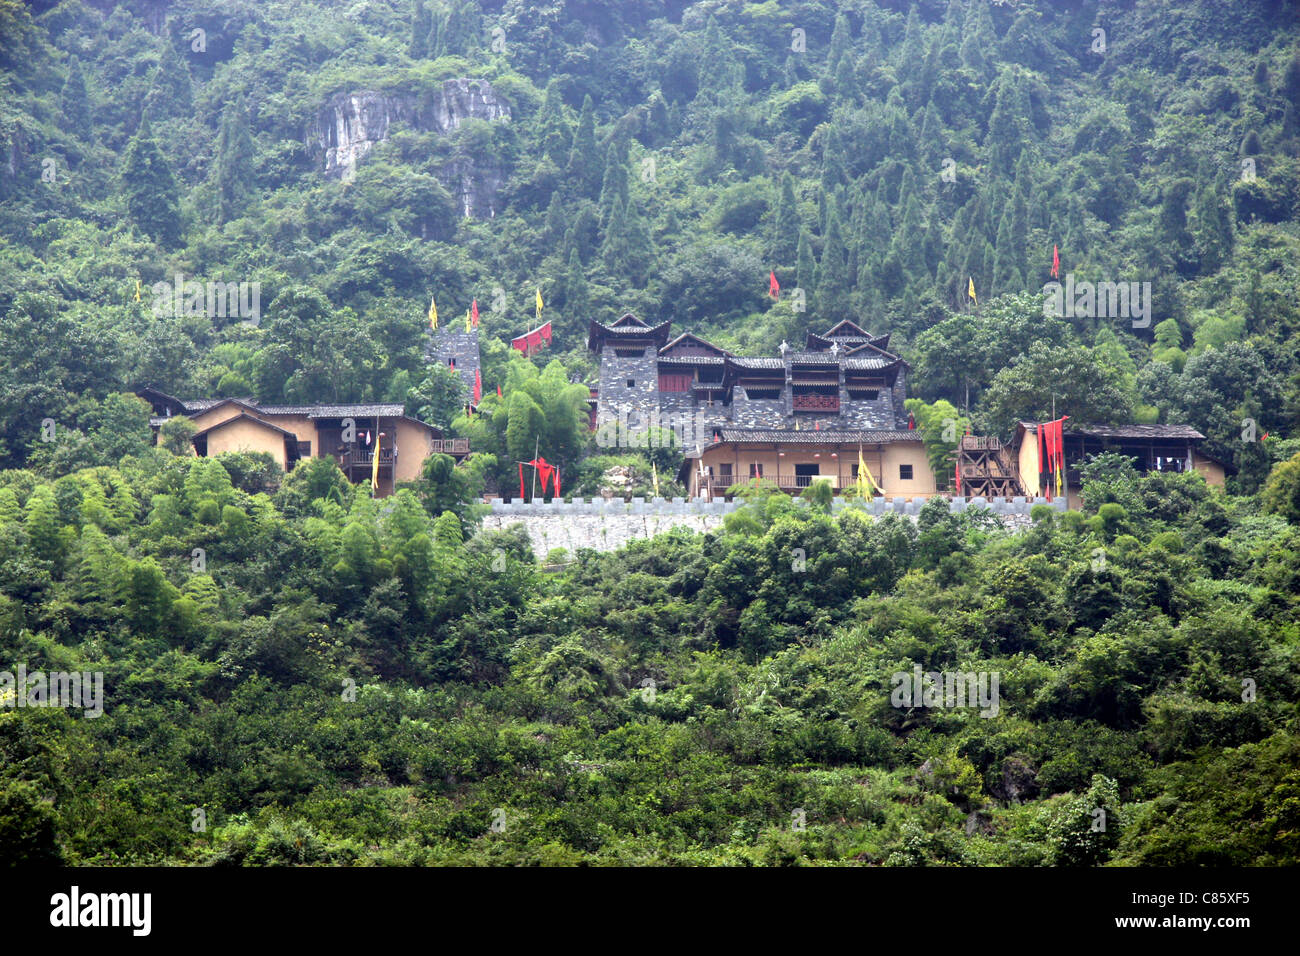 Temple located on the banks of the Yangtze River, below the Three Gorges Dam, China Stock Photo